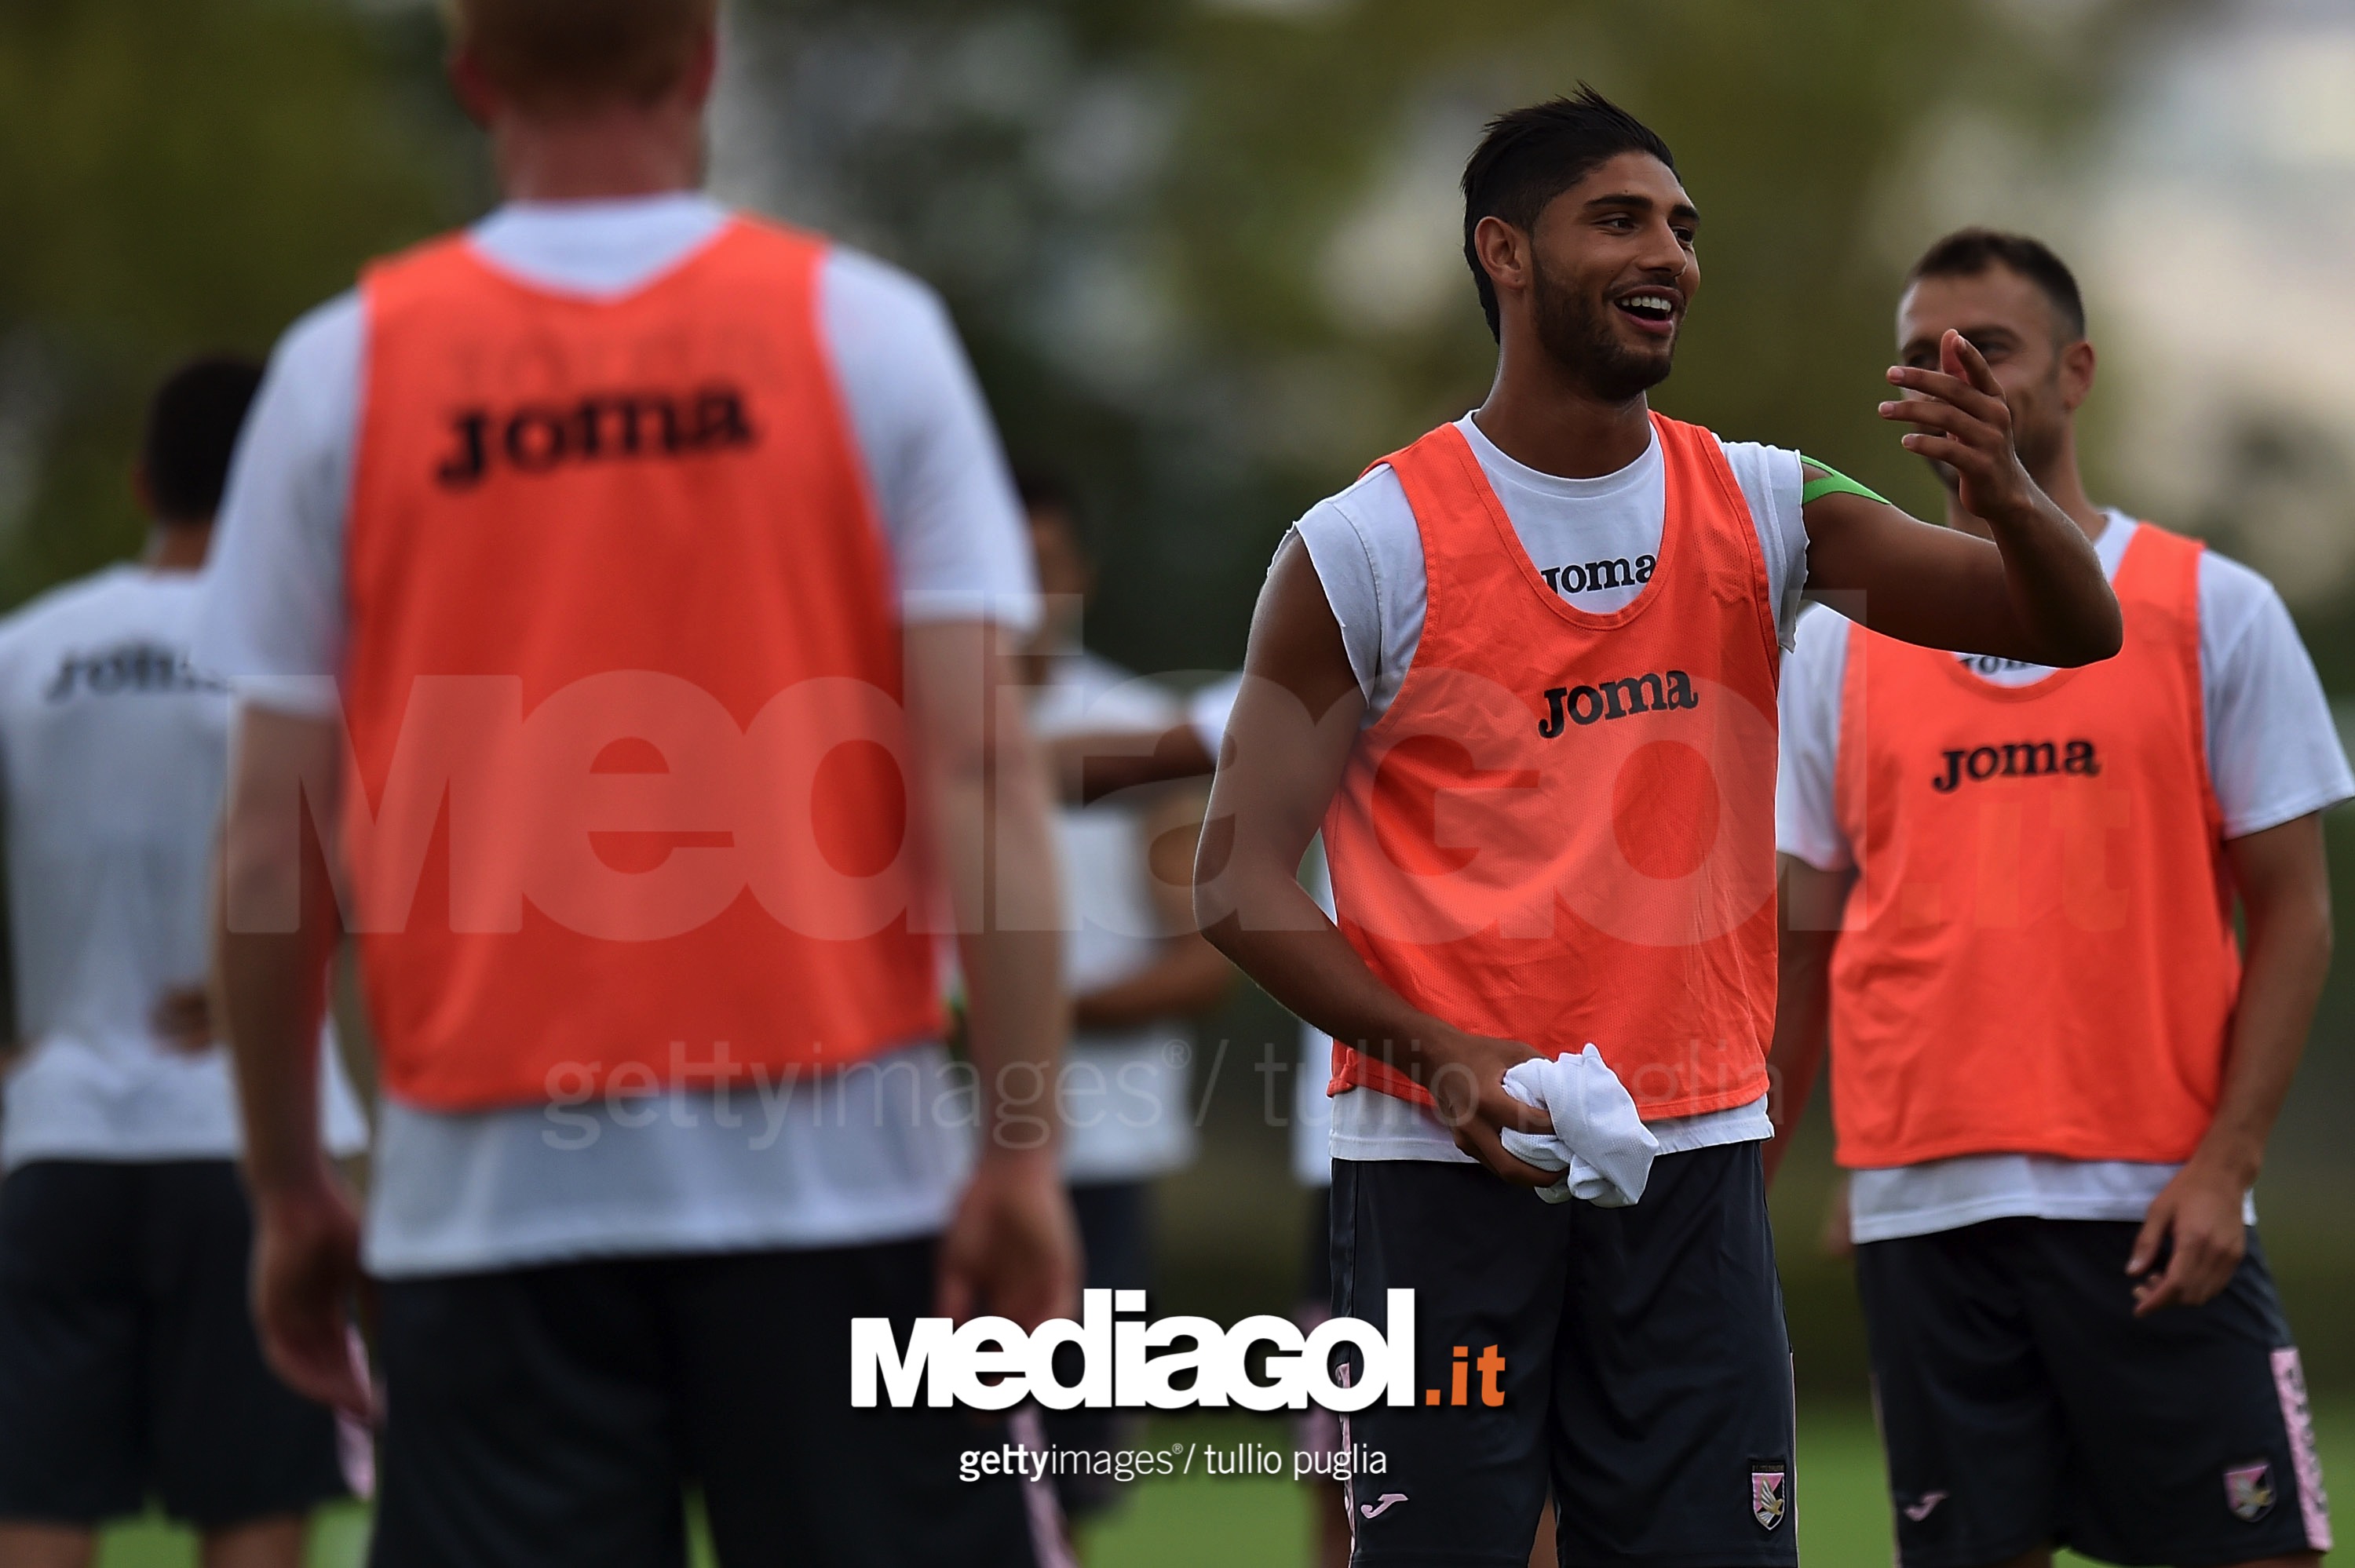 PALERMO, ITALY - AUGUST 01:  Ashraf Lazaar looks on during a US Citta di Palermo training session at Tenente carmelo Onorato training center on August 2, 2016 in Palermo, Italy.  (Photo by Tullio M. Puglia/Getty Images)